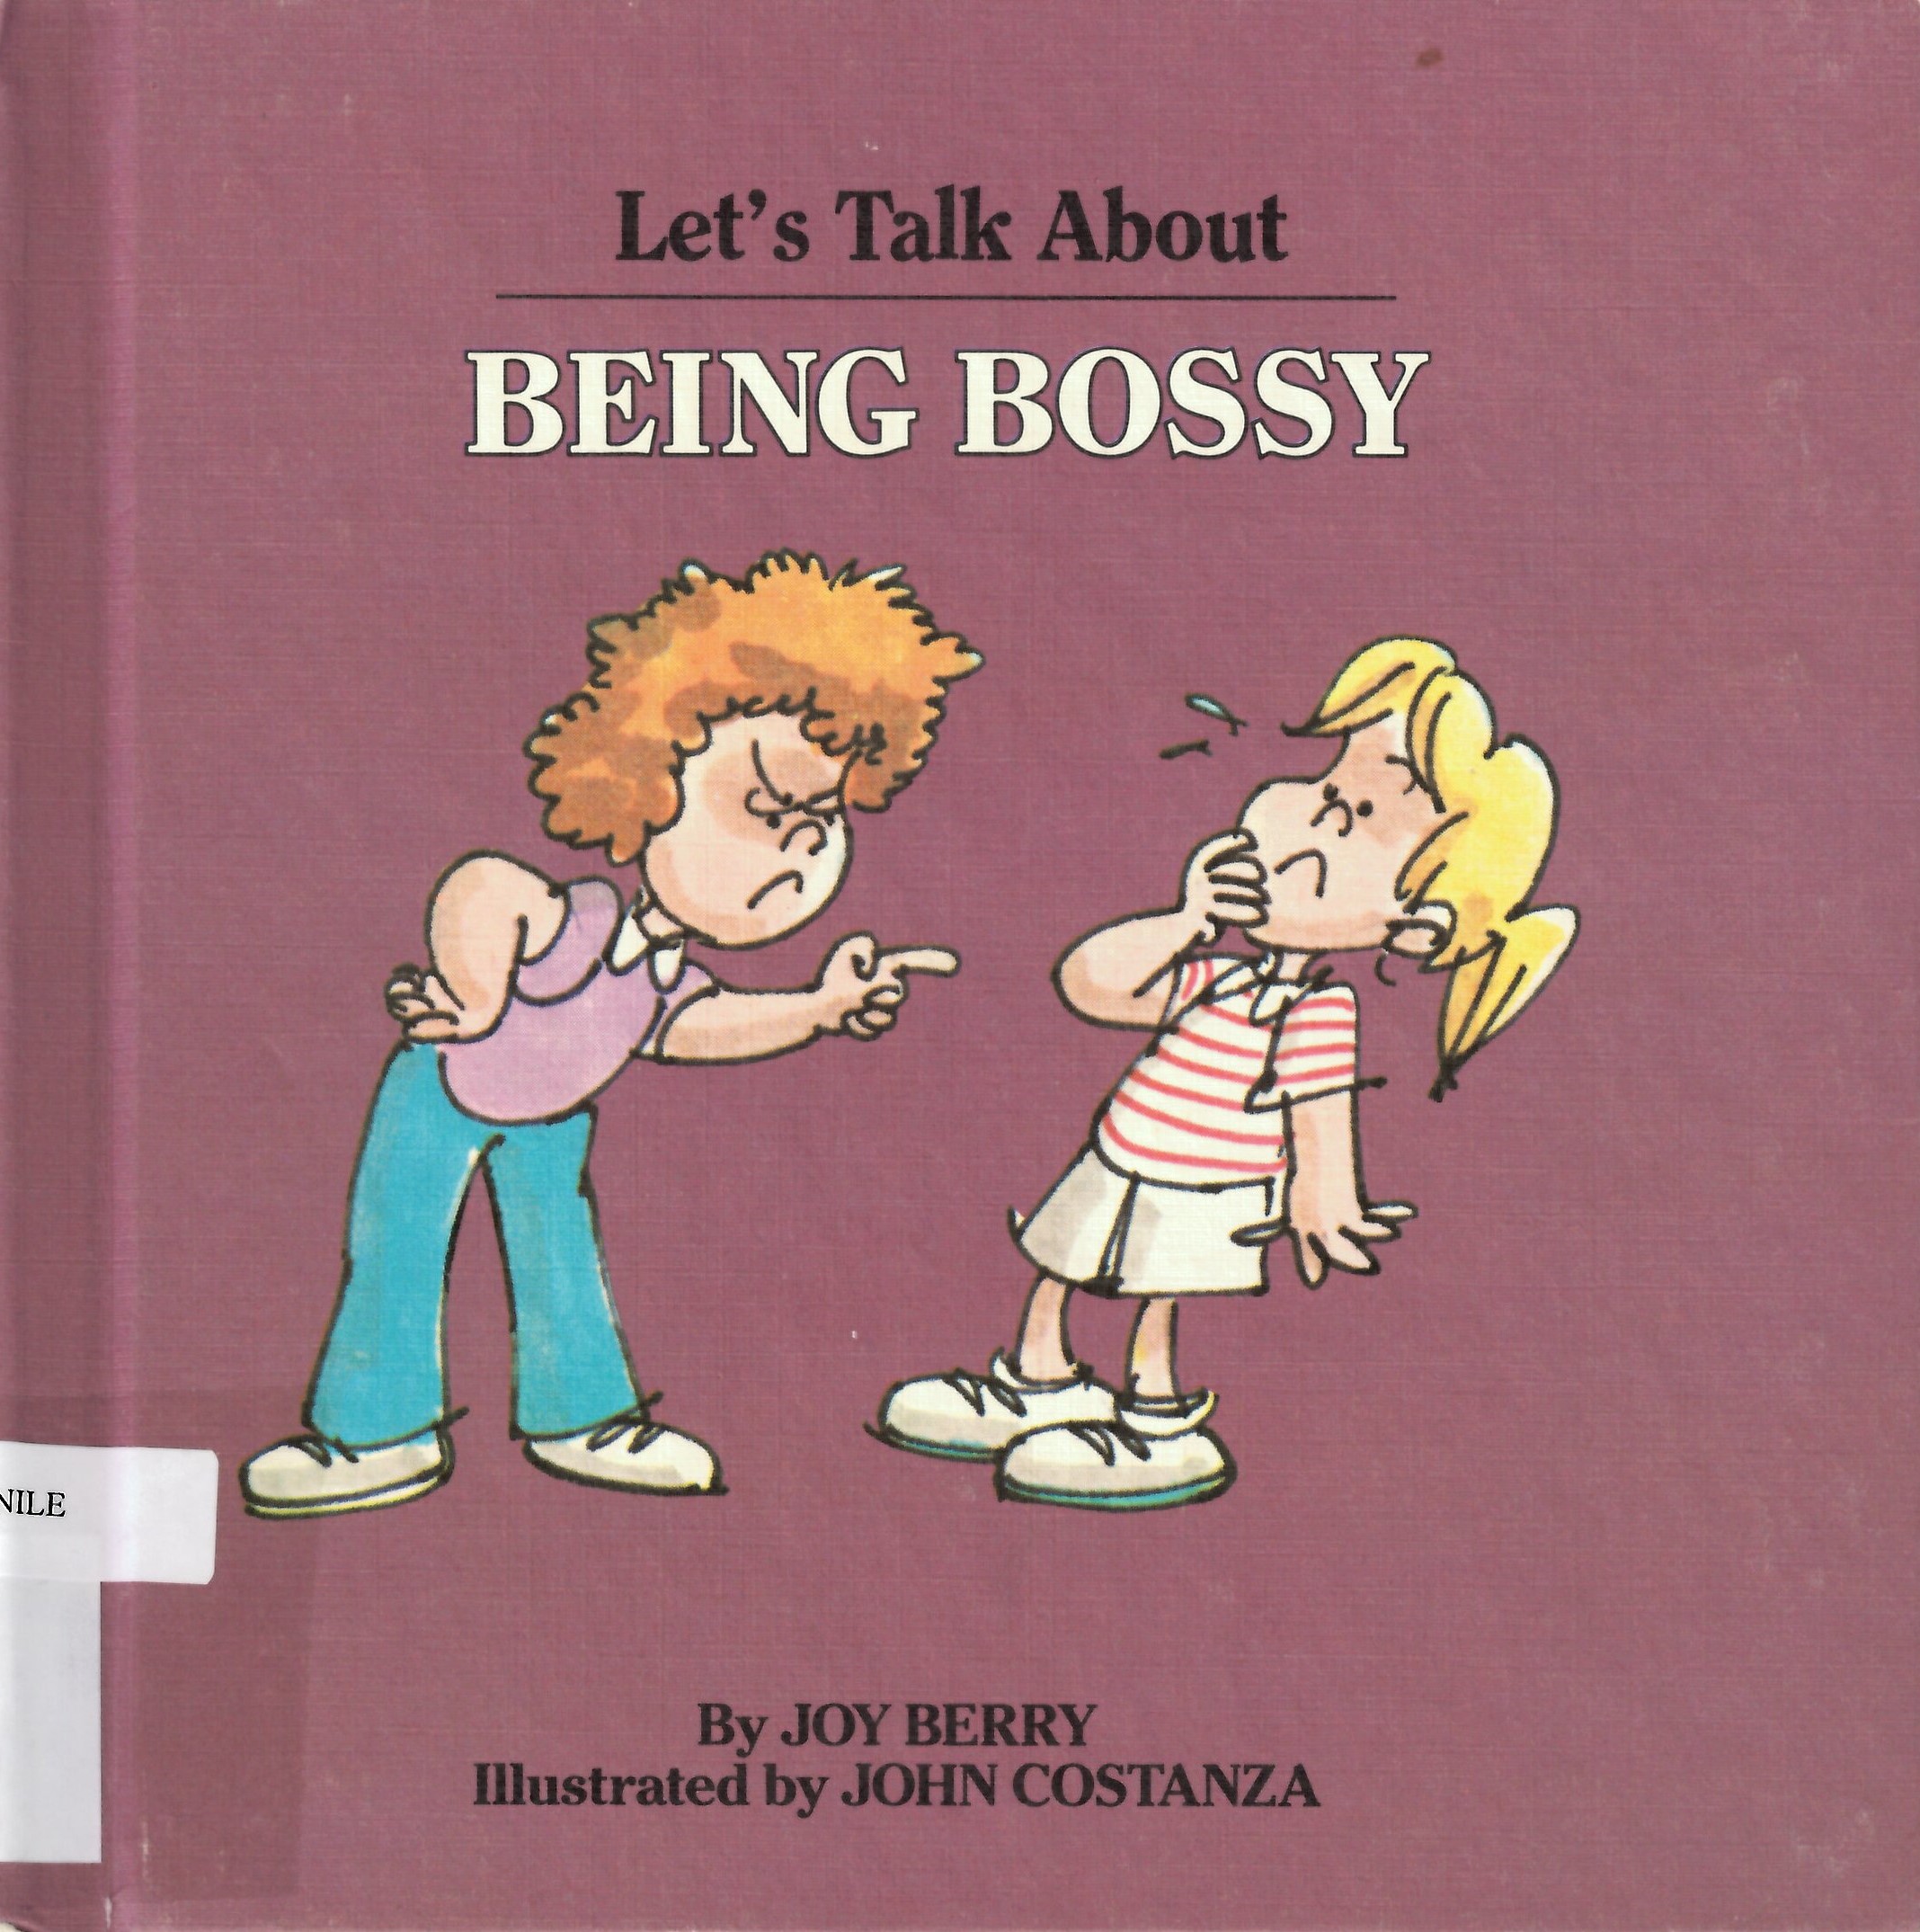 Let's talk about being bossy